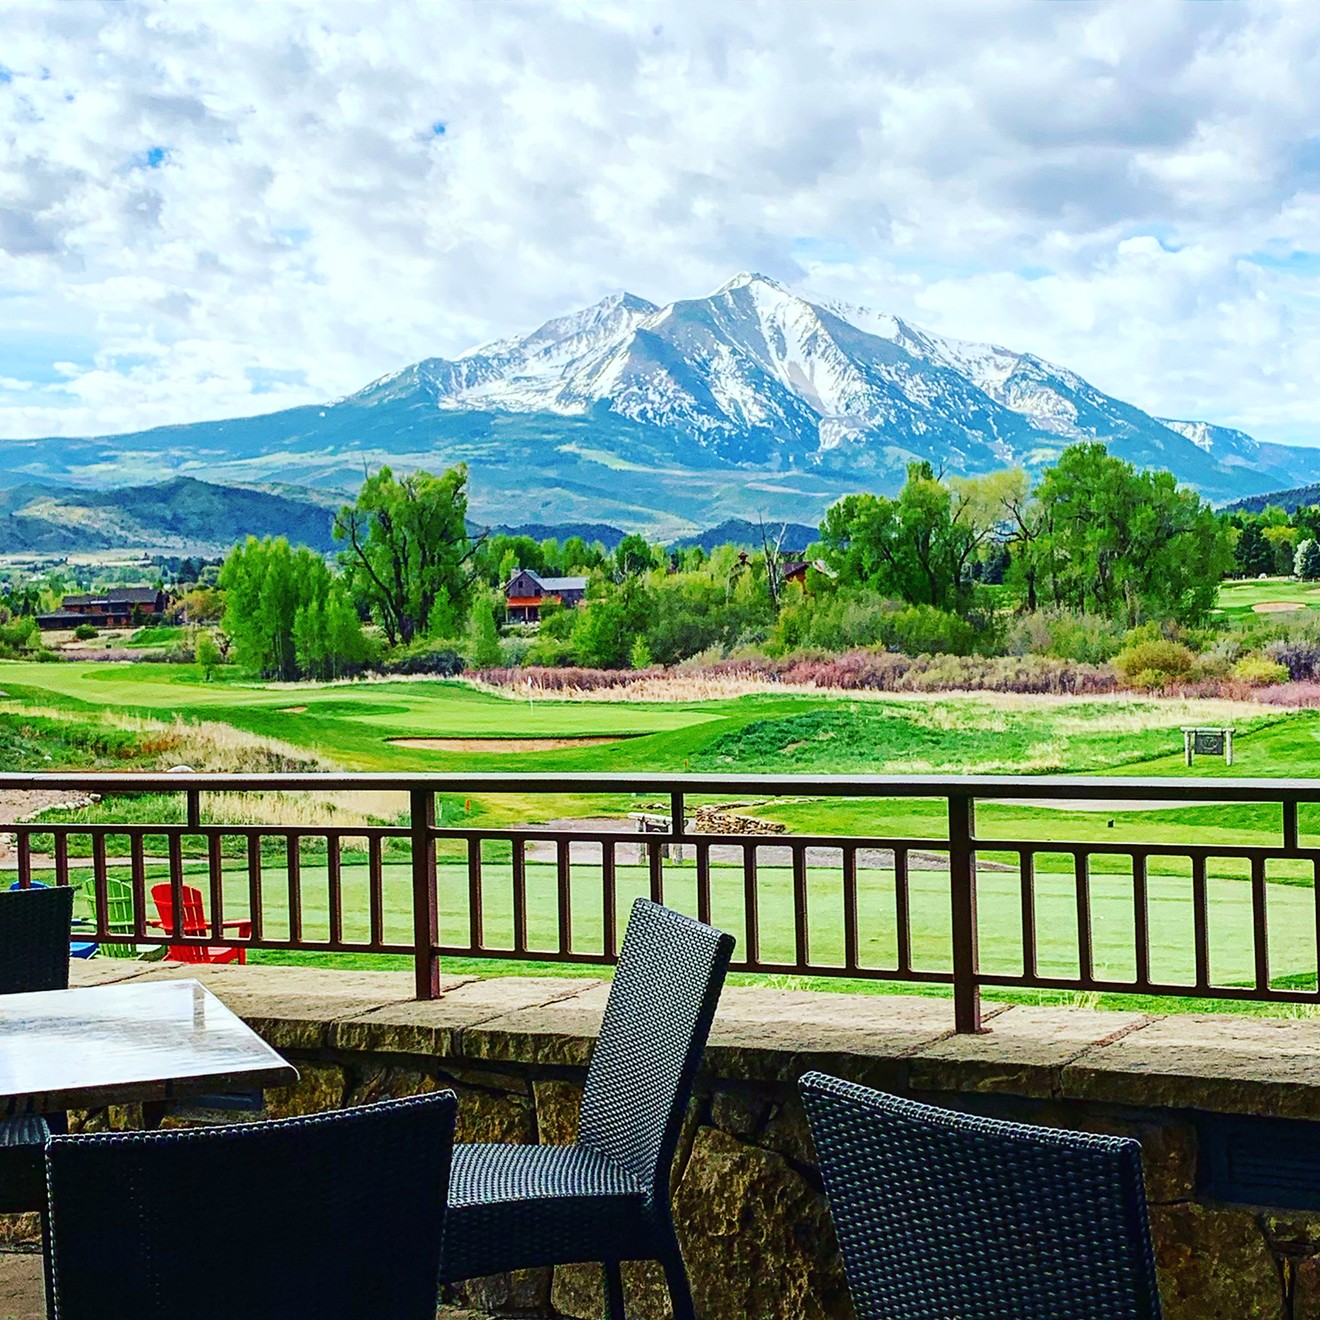 The Homestead in Carbondale offers front-row views of Mount Sopris.